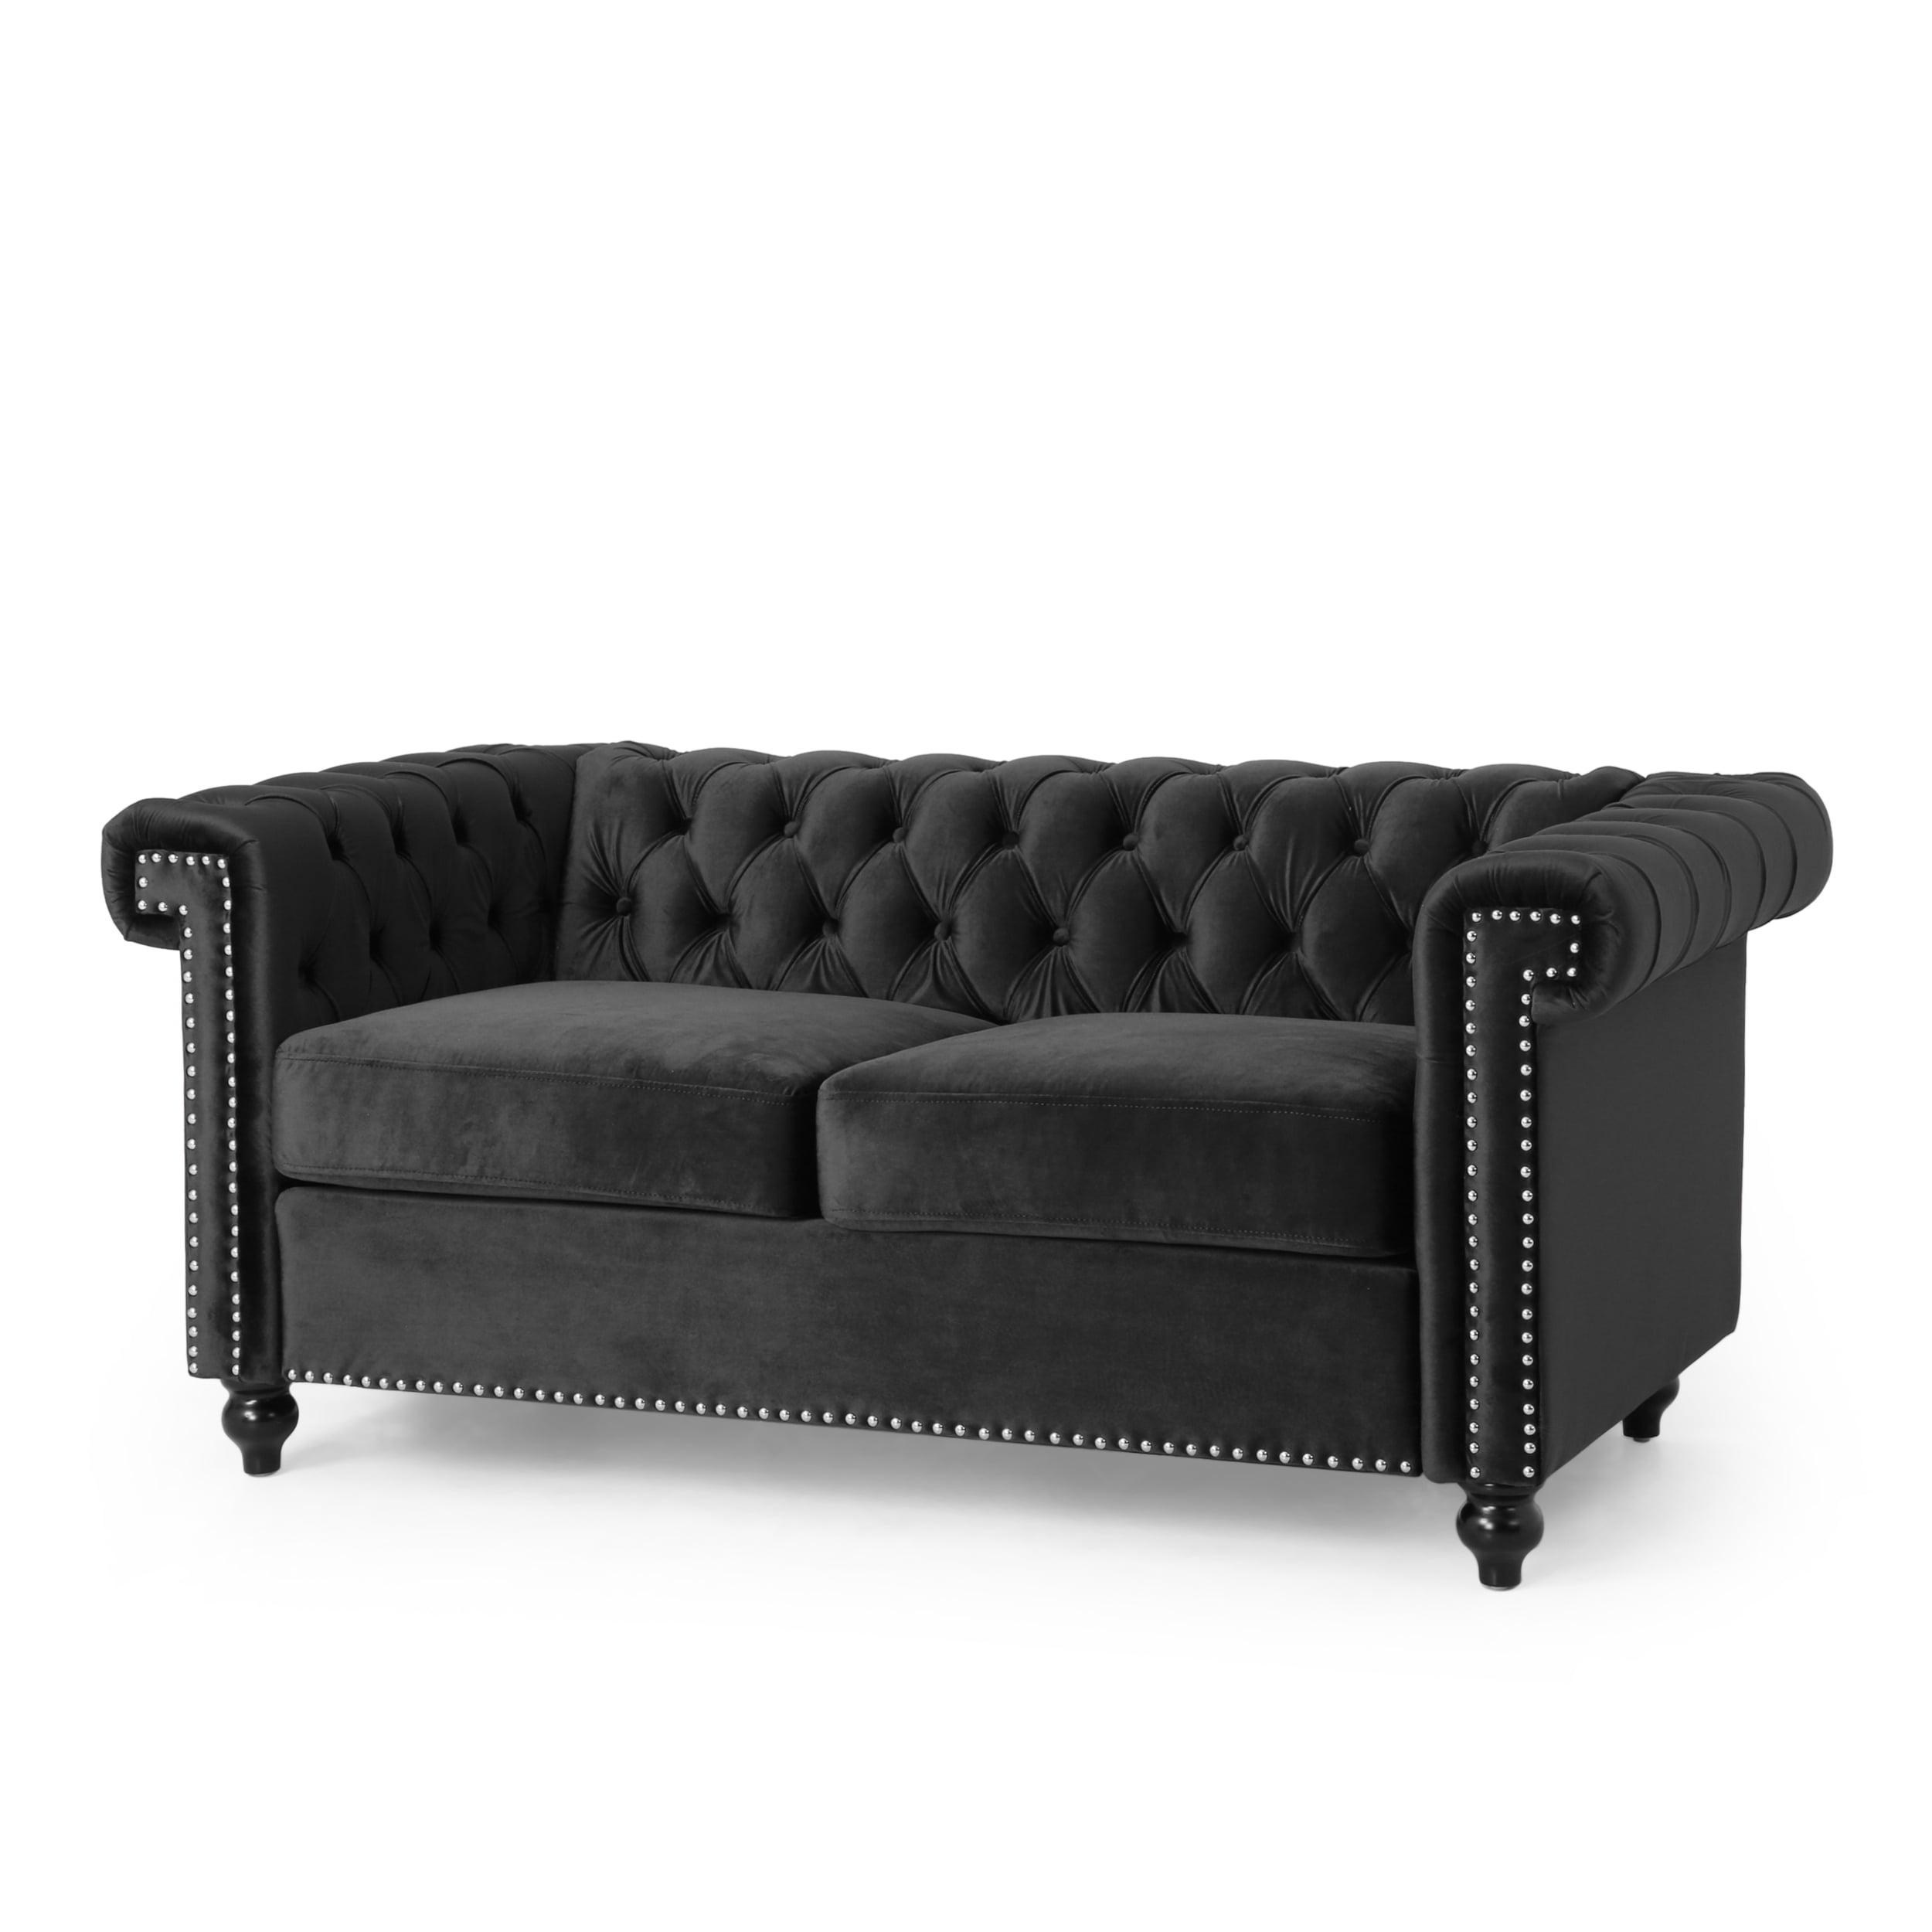 Elegant Black Velvet Tufted Loveseat with Nailhead Accents and Wood Frame